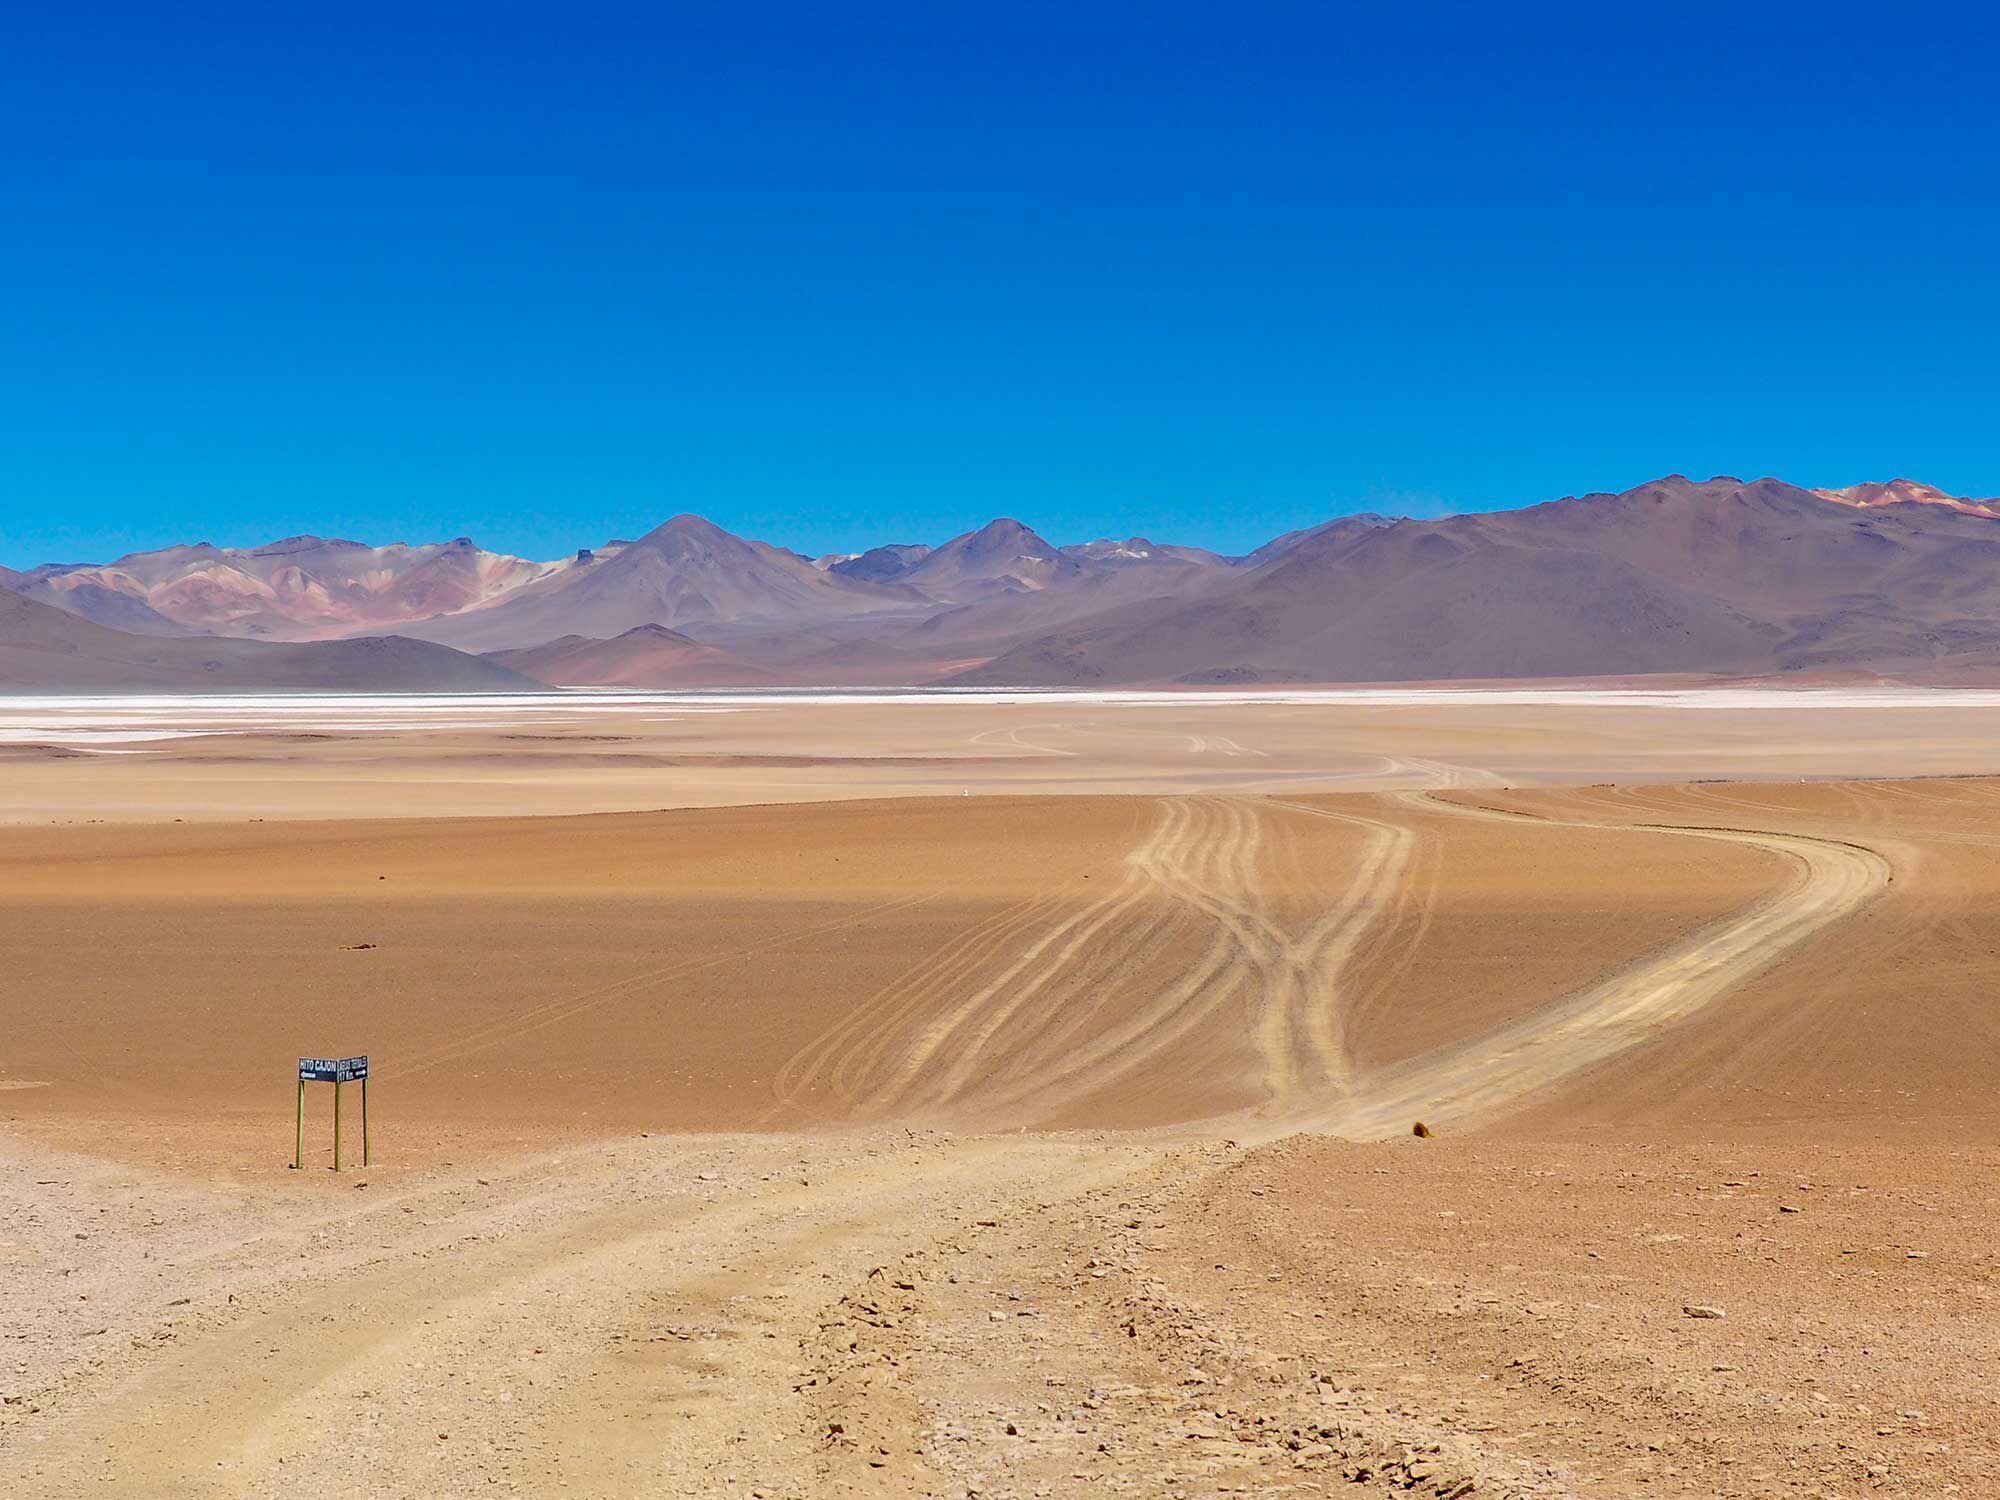 Roads can get a little confusing out beyond Uyuni, Bolivia, especially in the fading light, while looking out for your girlfriend and your cat, in the company of an inexperienced rider and his injured passenger.